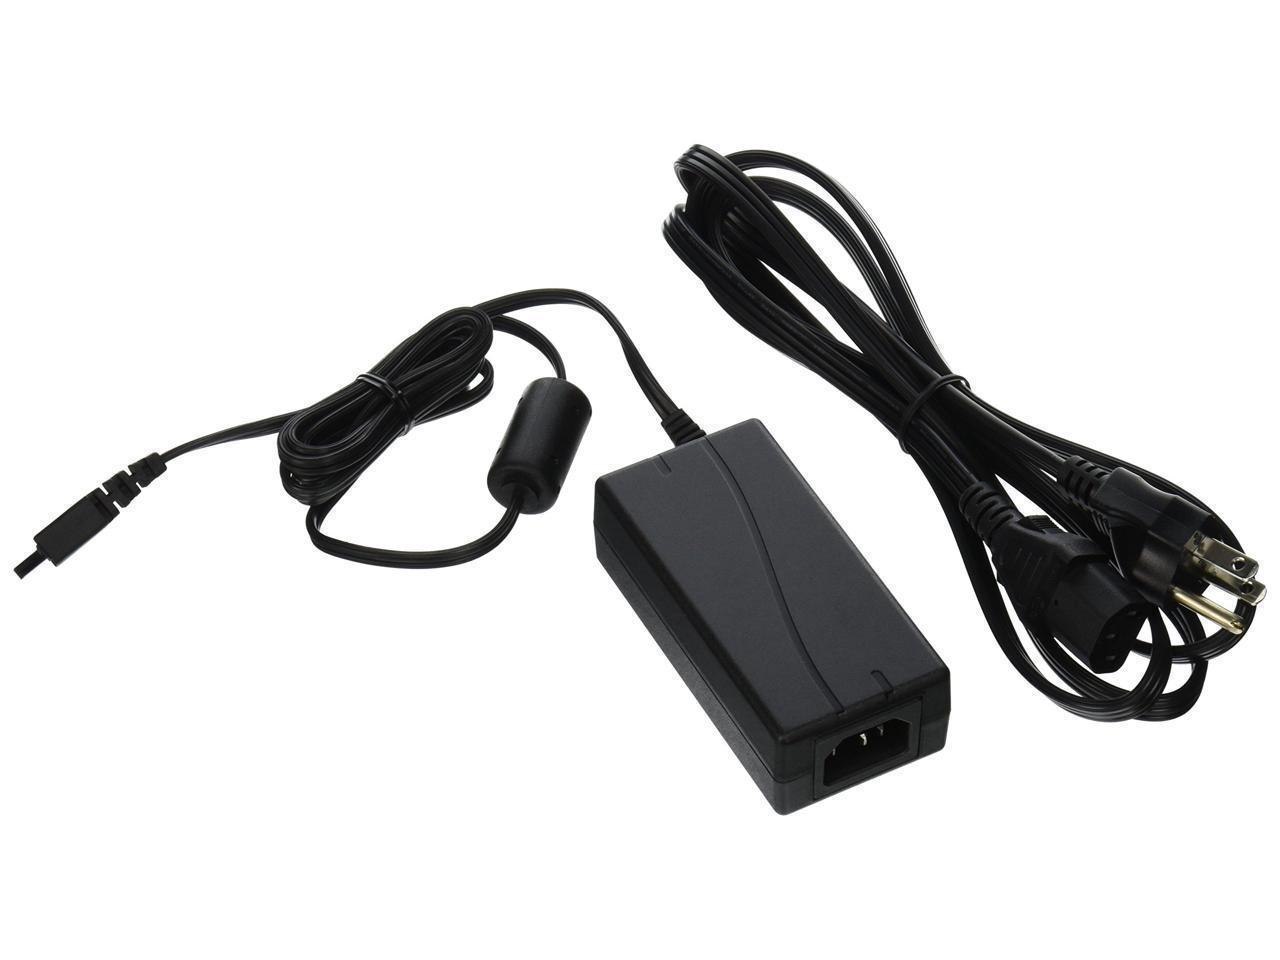 SonicWall AC Adapter